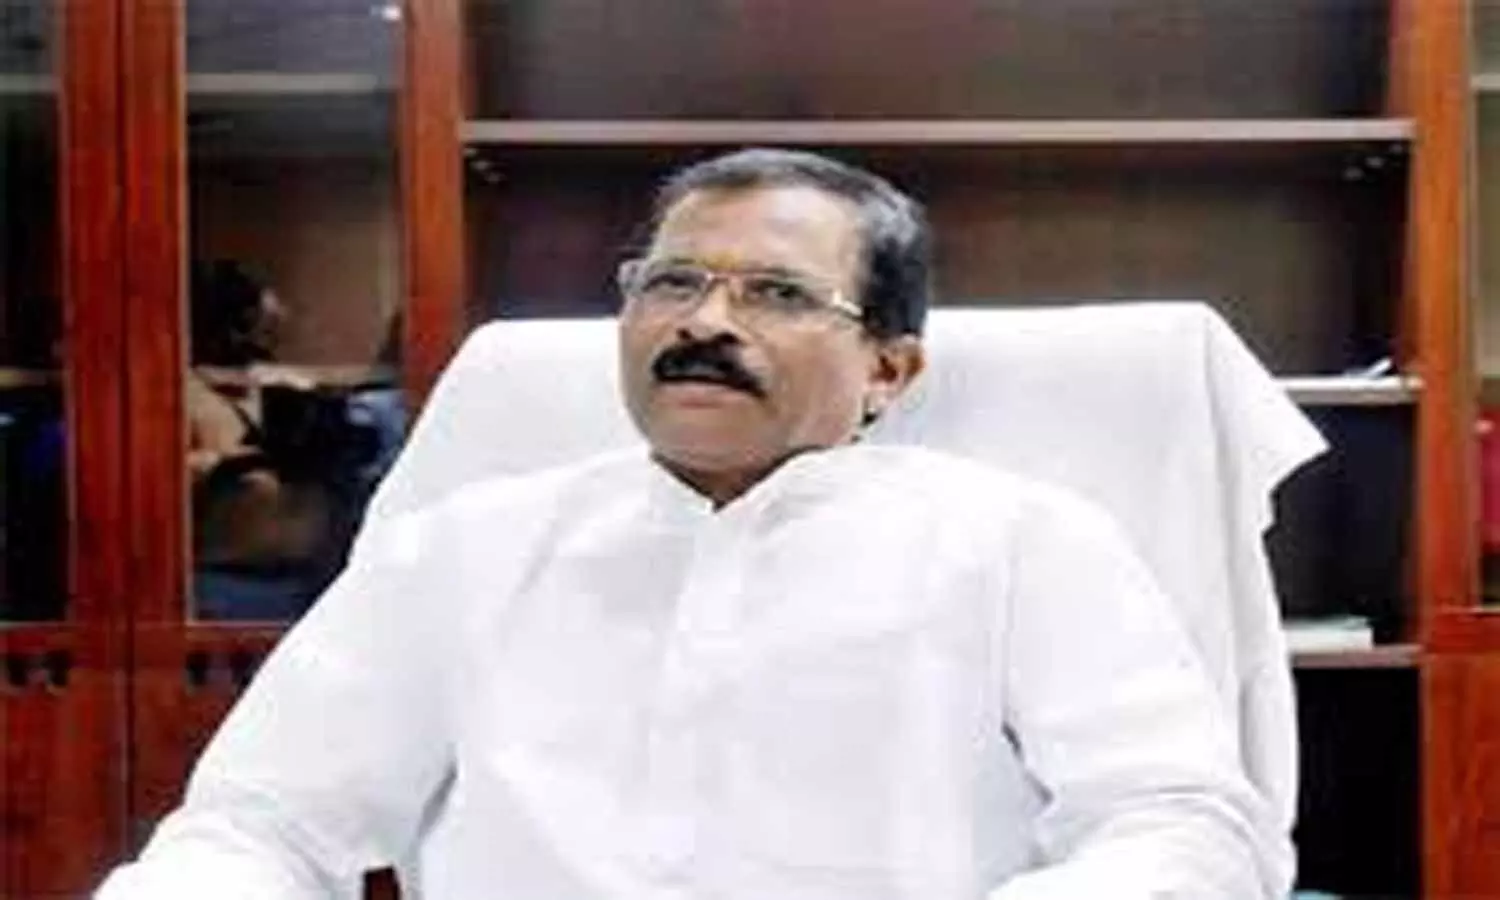 No concept of mixopathy, Ayurvedic doctors are also trained to perform surgeries: AYUSH minister